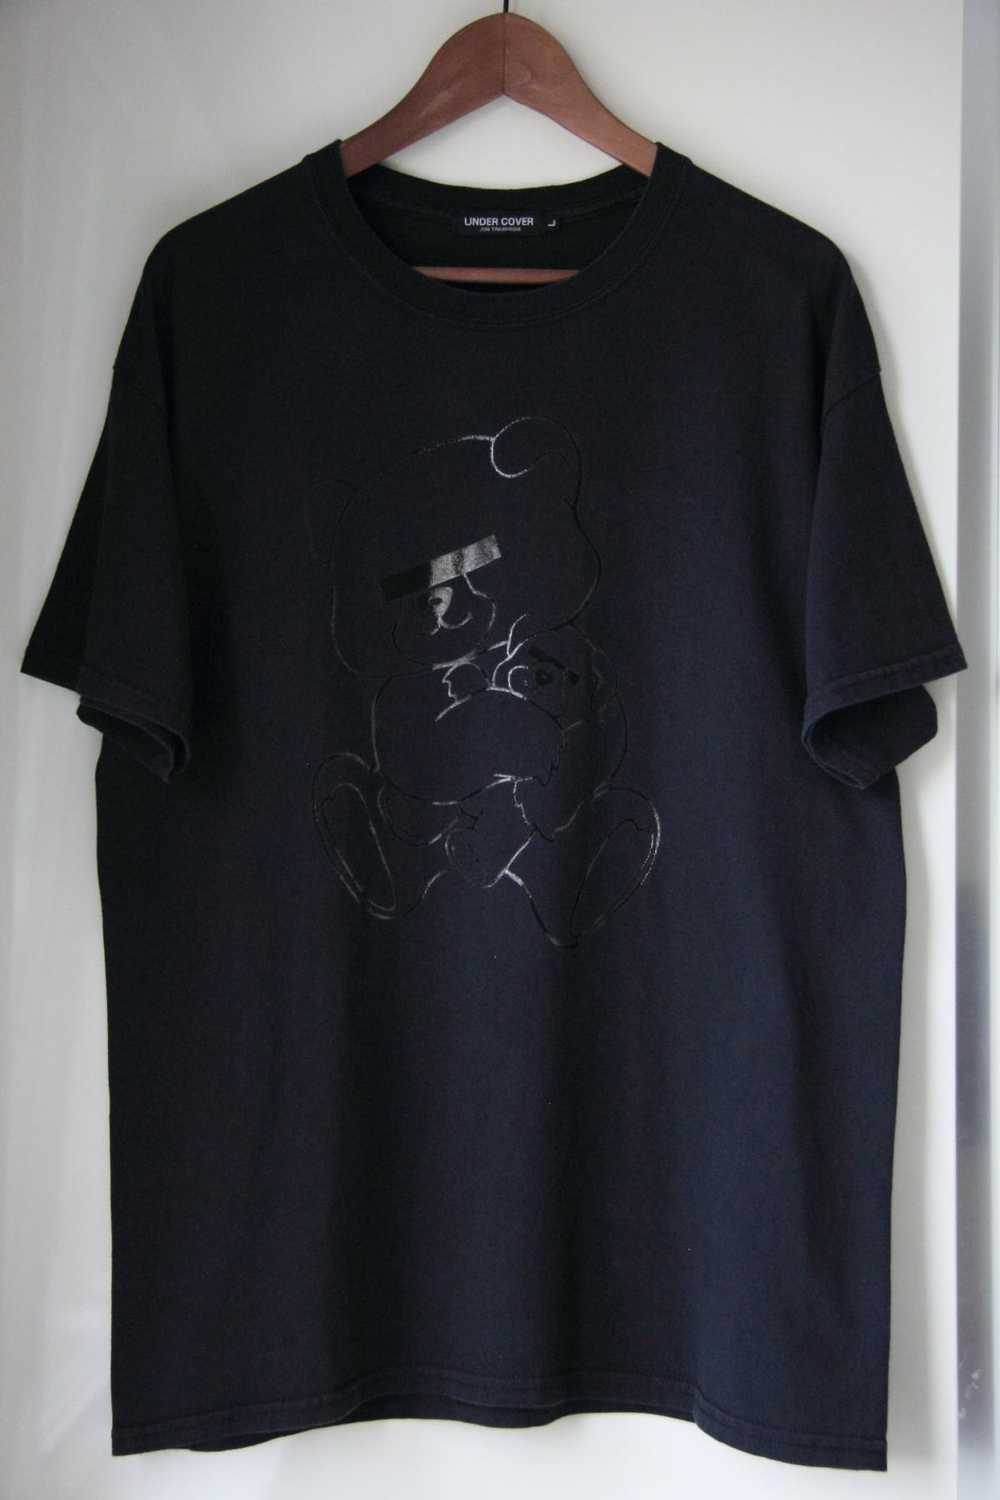 Undercover UNDERCOVER BEARS T-SHIRT SIZE L - image 1